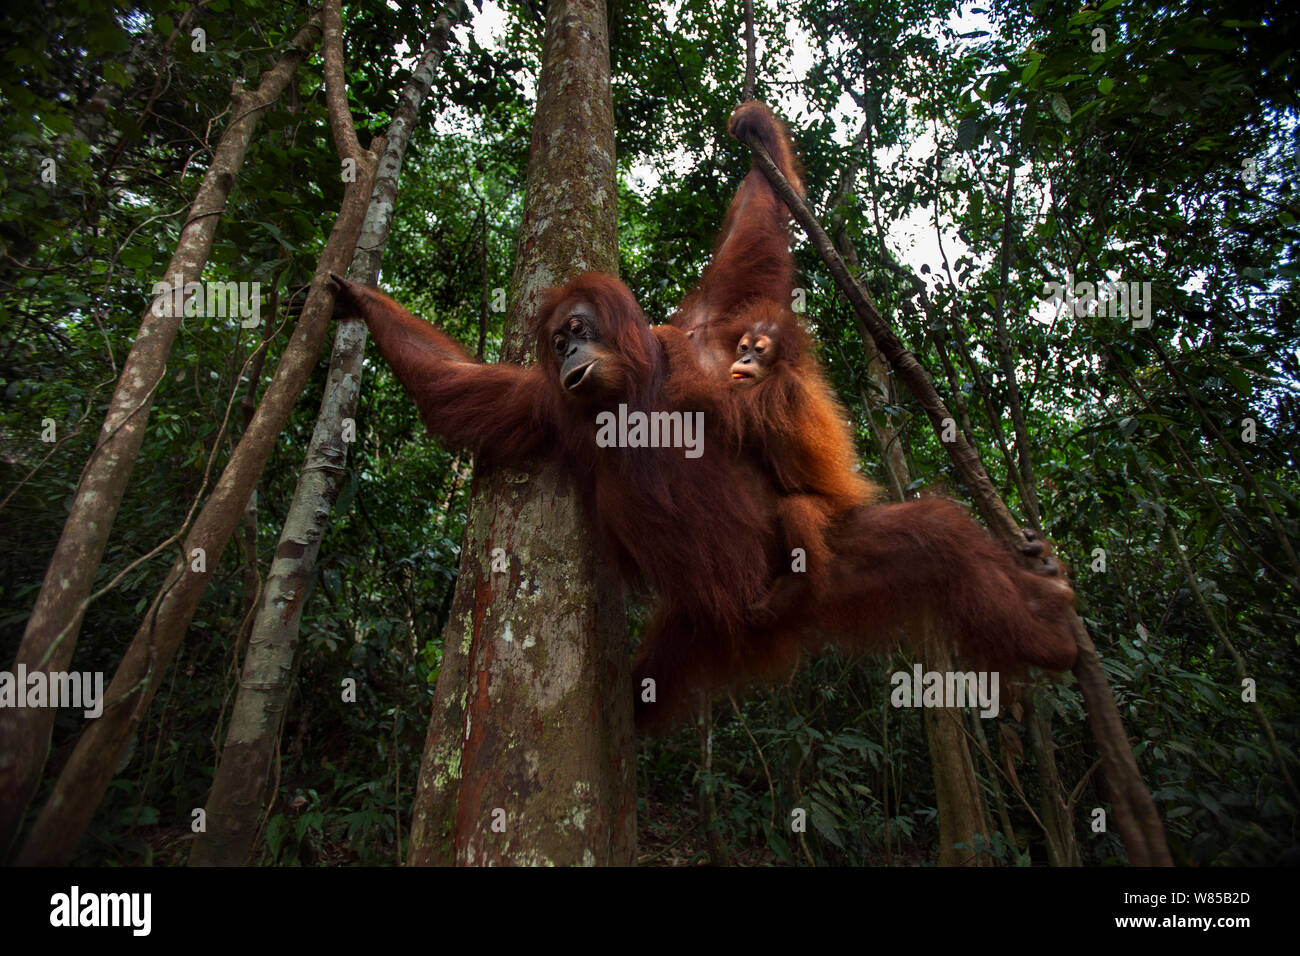 Sumatran orangutan (Pongo abelii) female 'Sandra' aged 22 years and her baby daughter 'Sandri' aged 1-2 years hanging from a liana . Gunung Leuser National Park, Sumatra, Indonesia. Rehabilitated and released (or descended from those which were released) between 1973 and 1995. Stock Photo